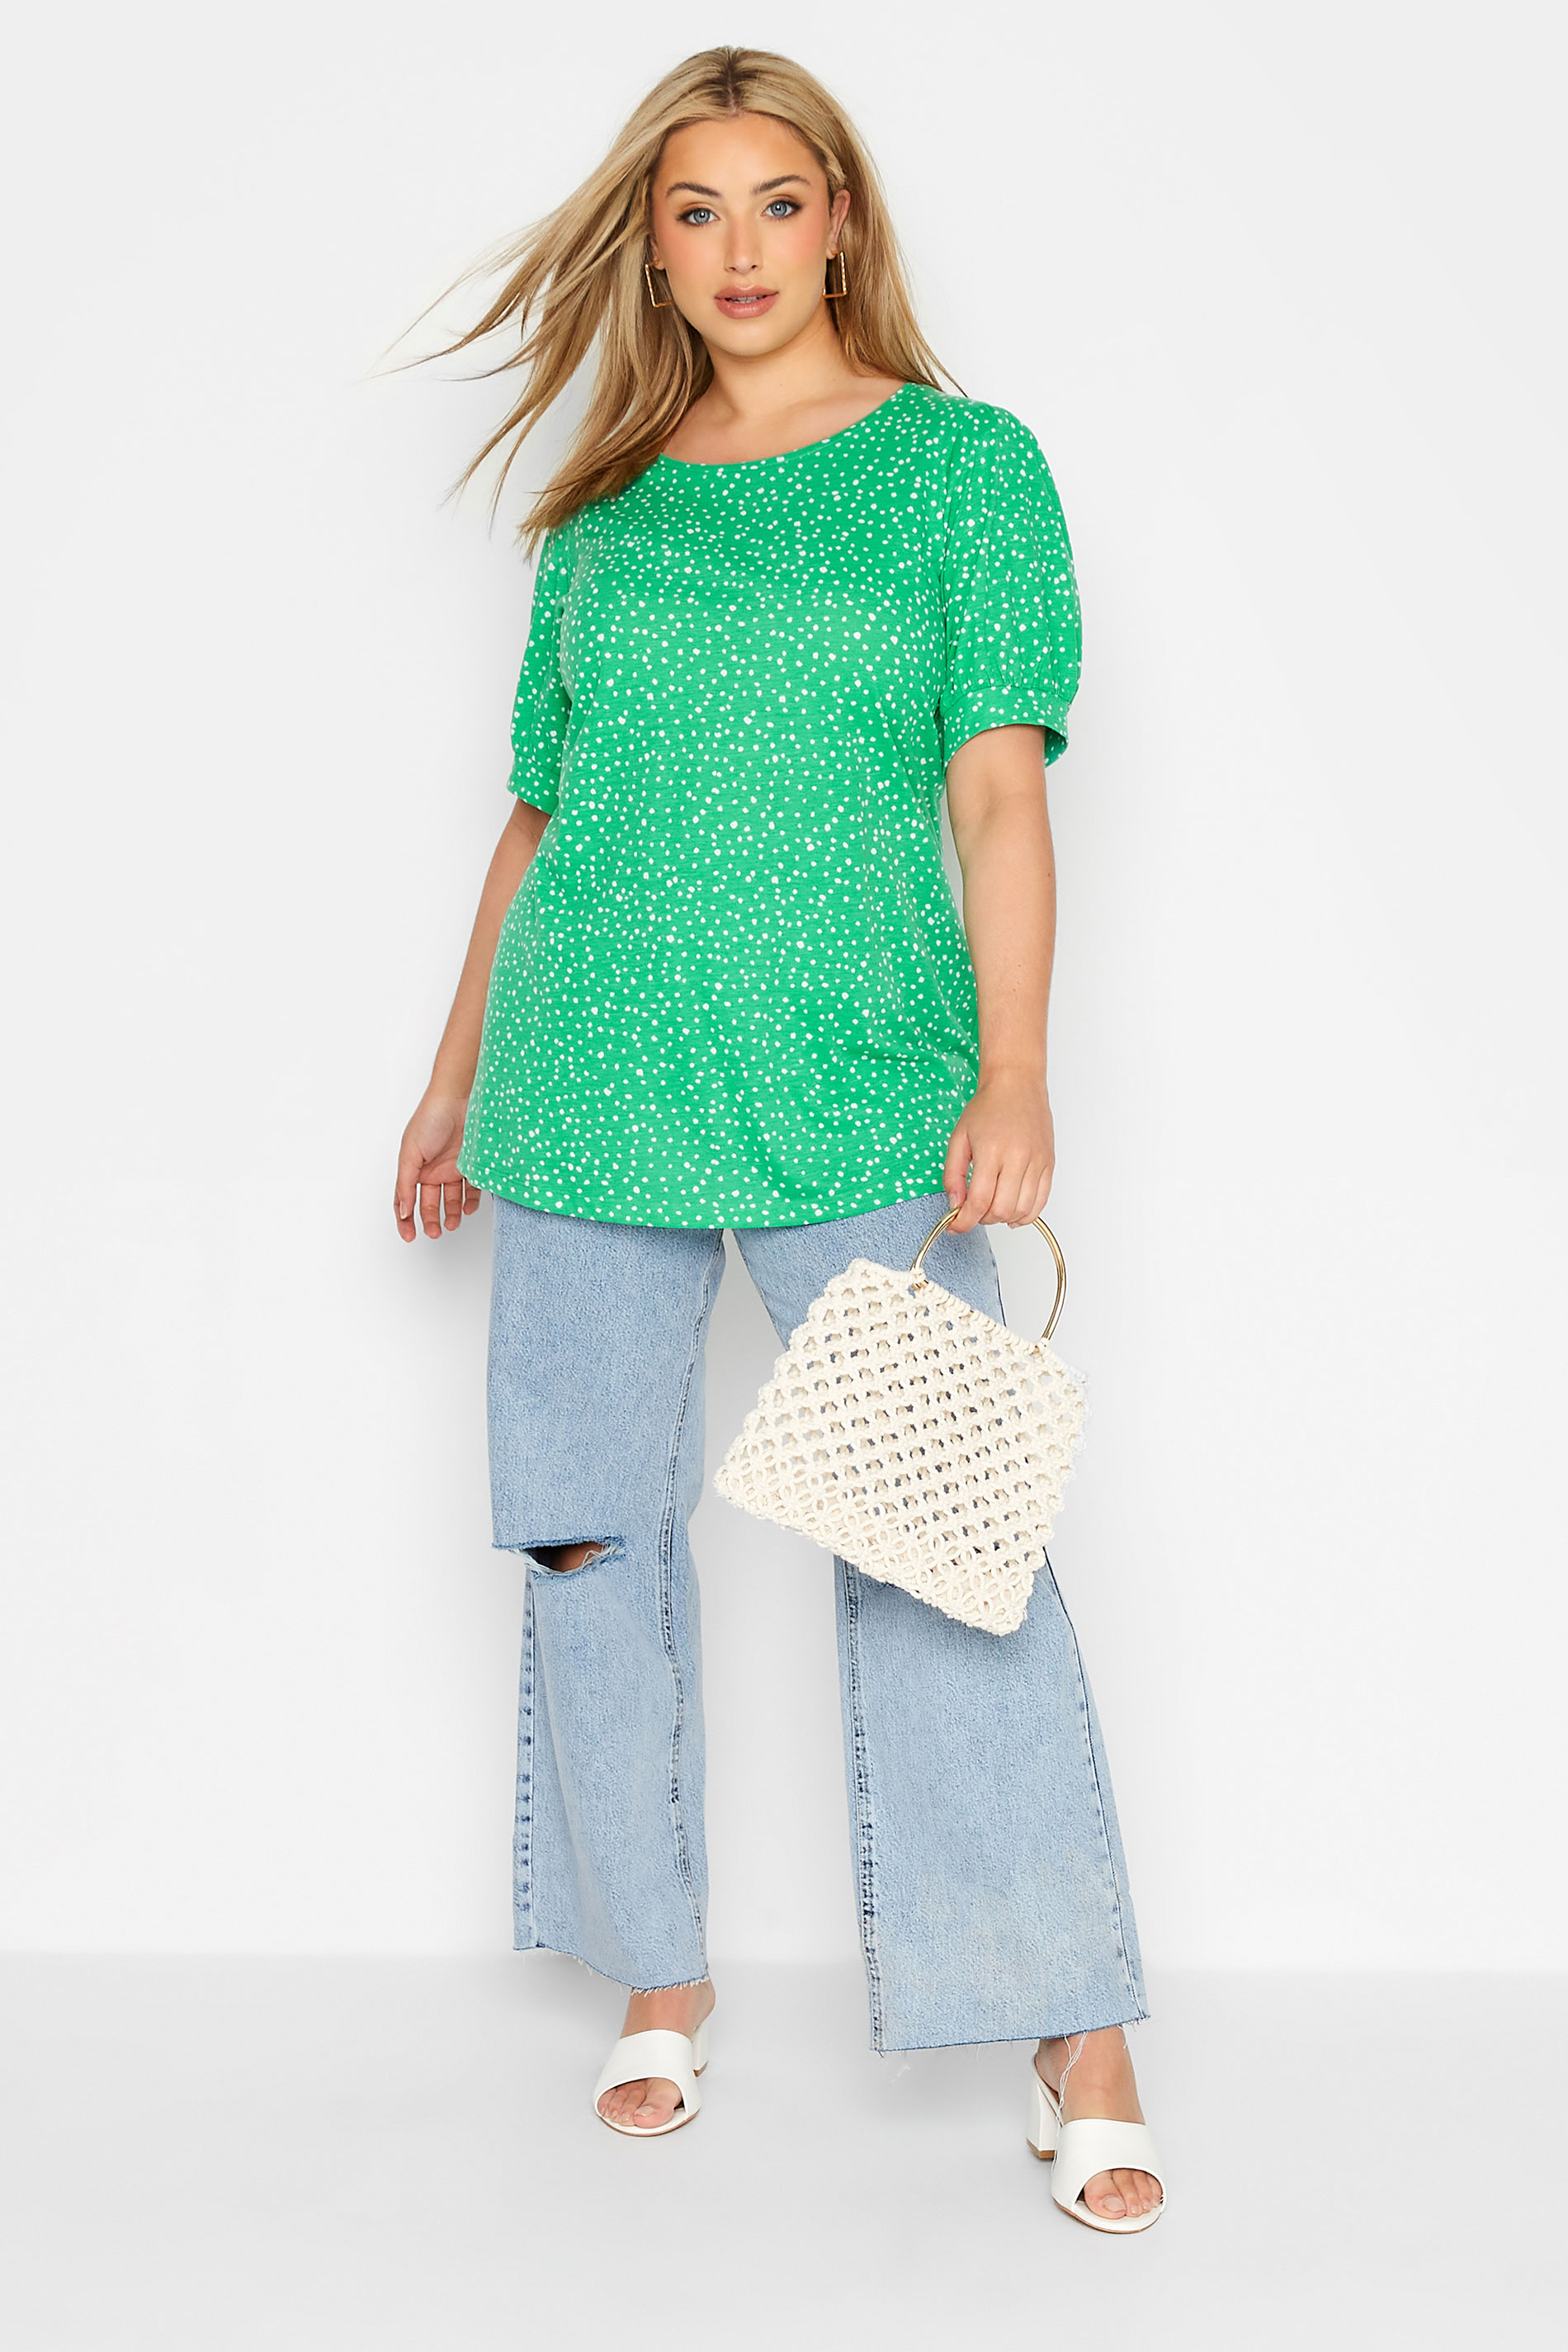 Grande taille  Tops Grande taille  Tops Jersey | T-Shirt Vert Manches Bouffantes à Pois - BE58390